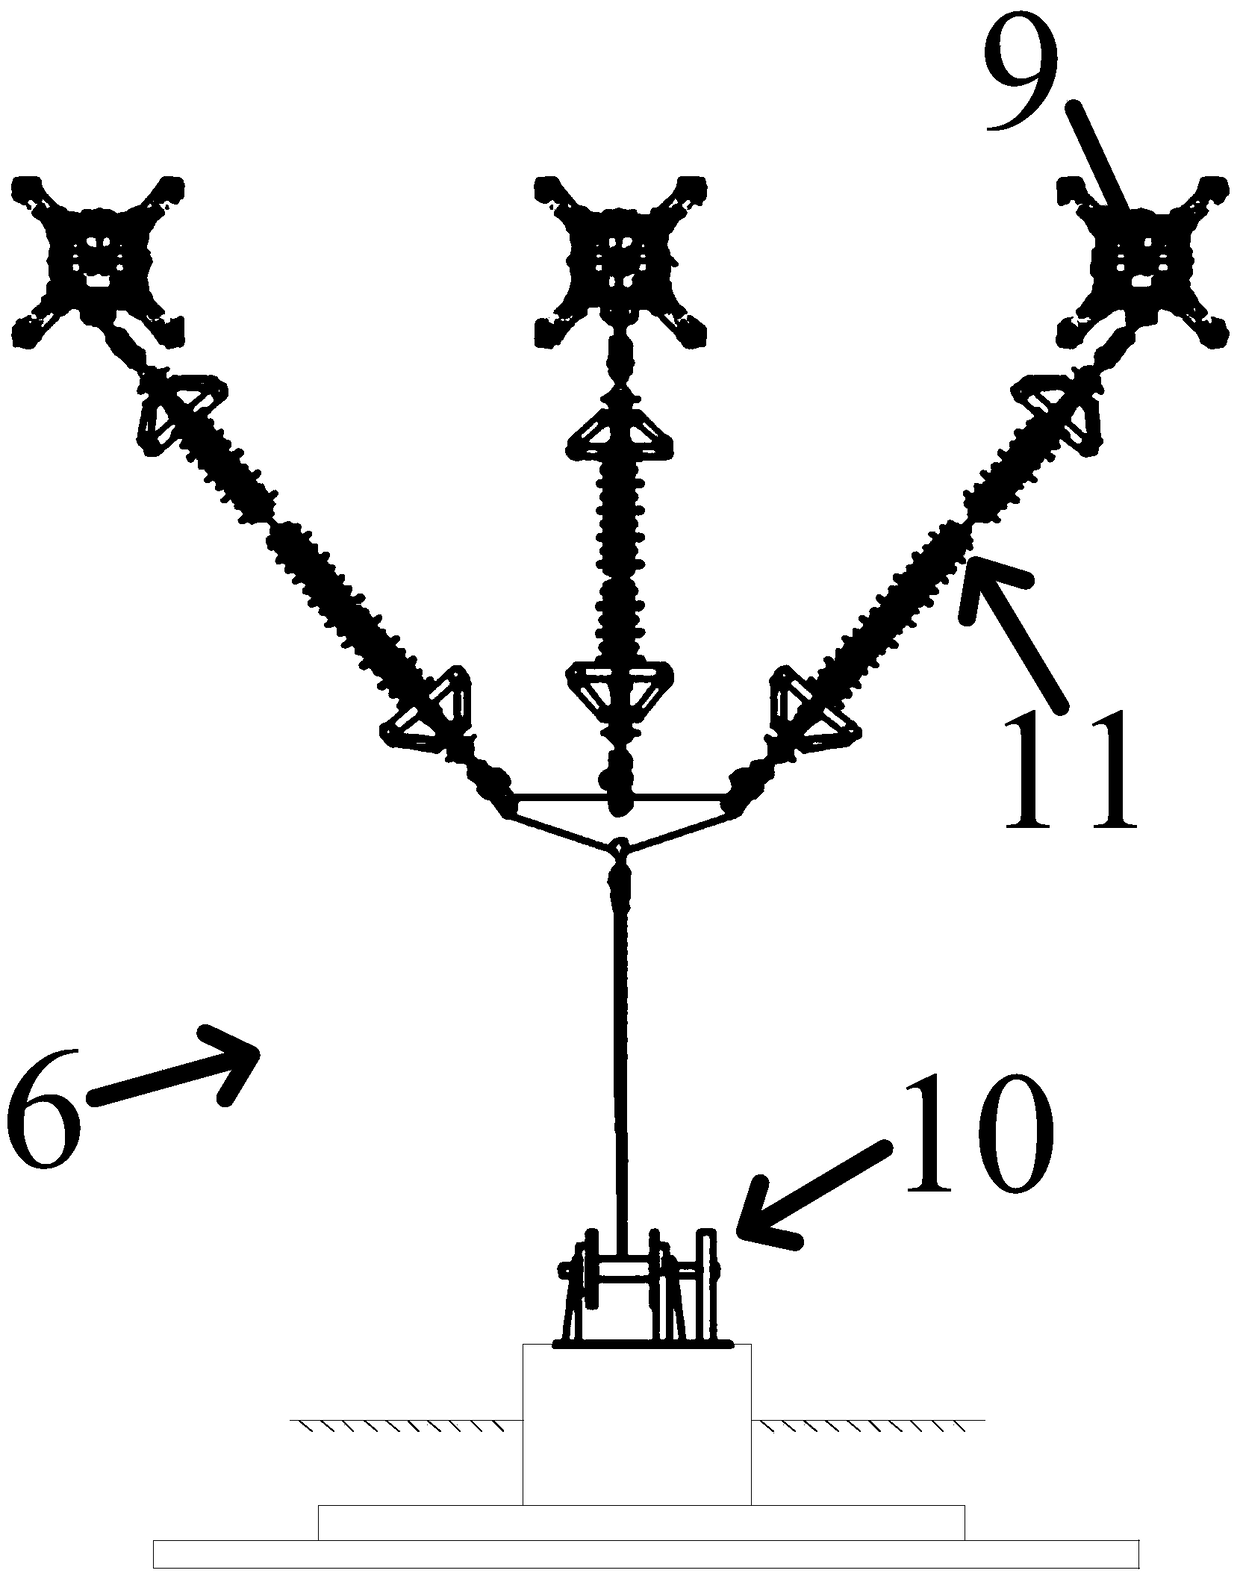 An aluminized steel transmission tower